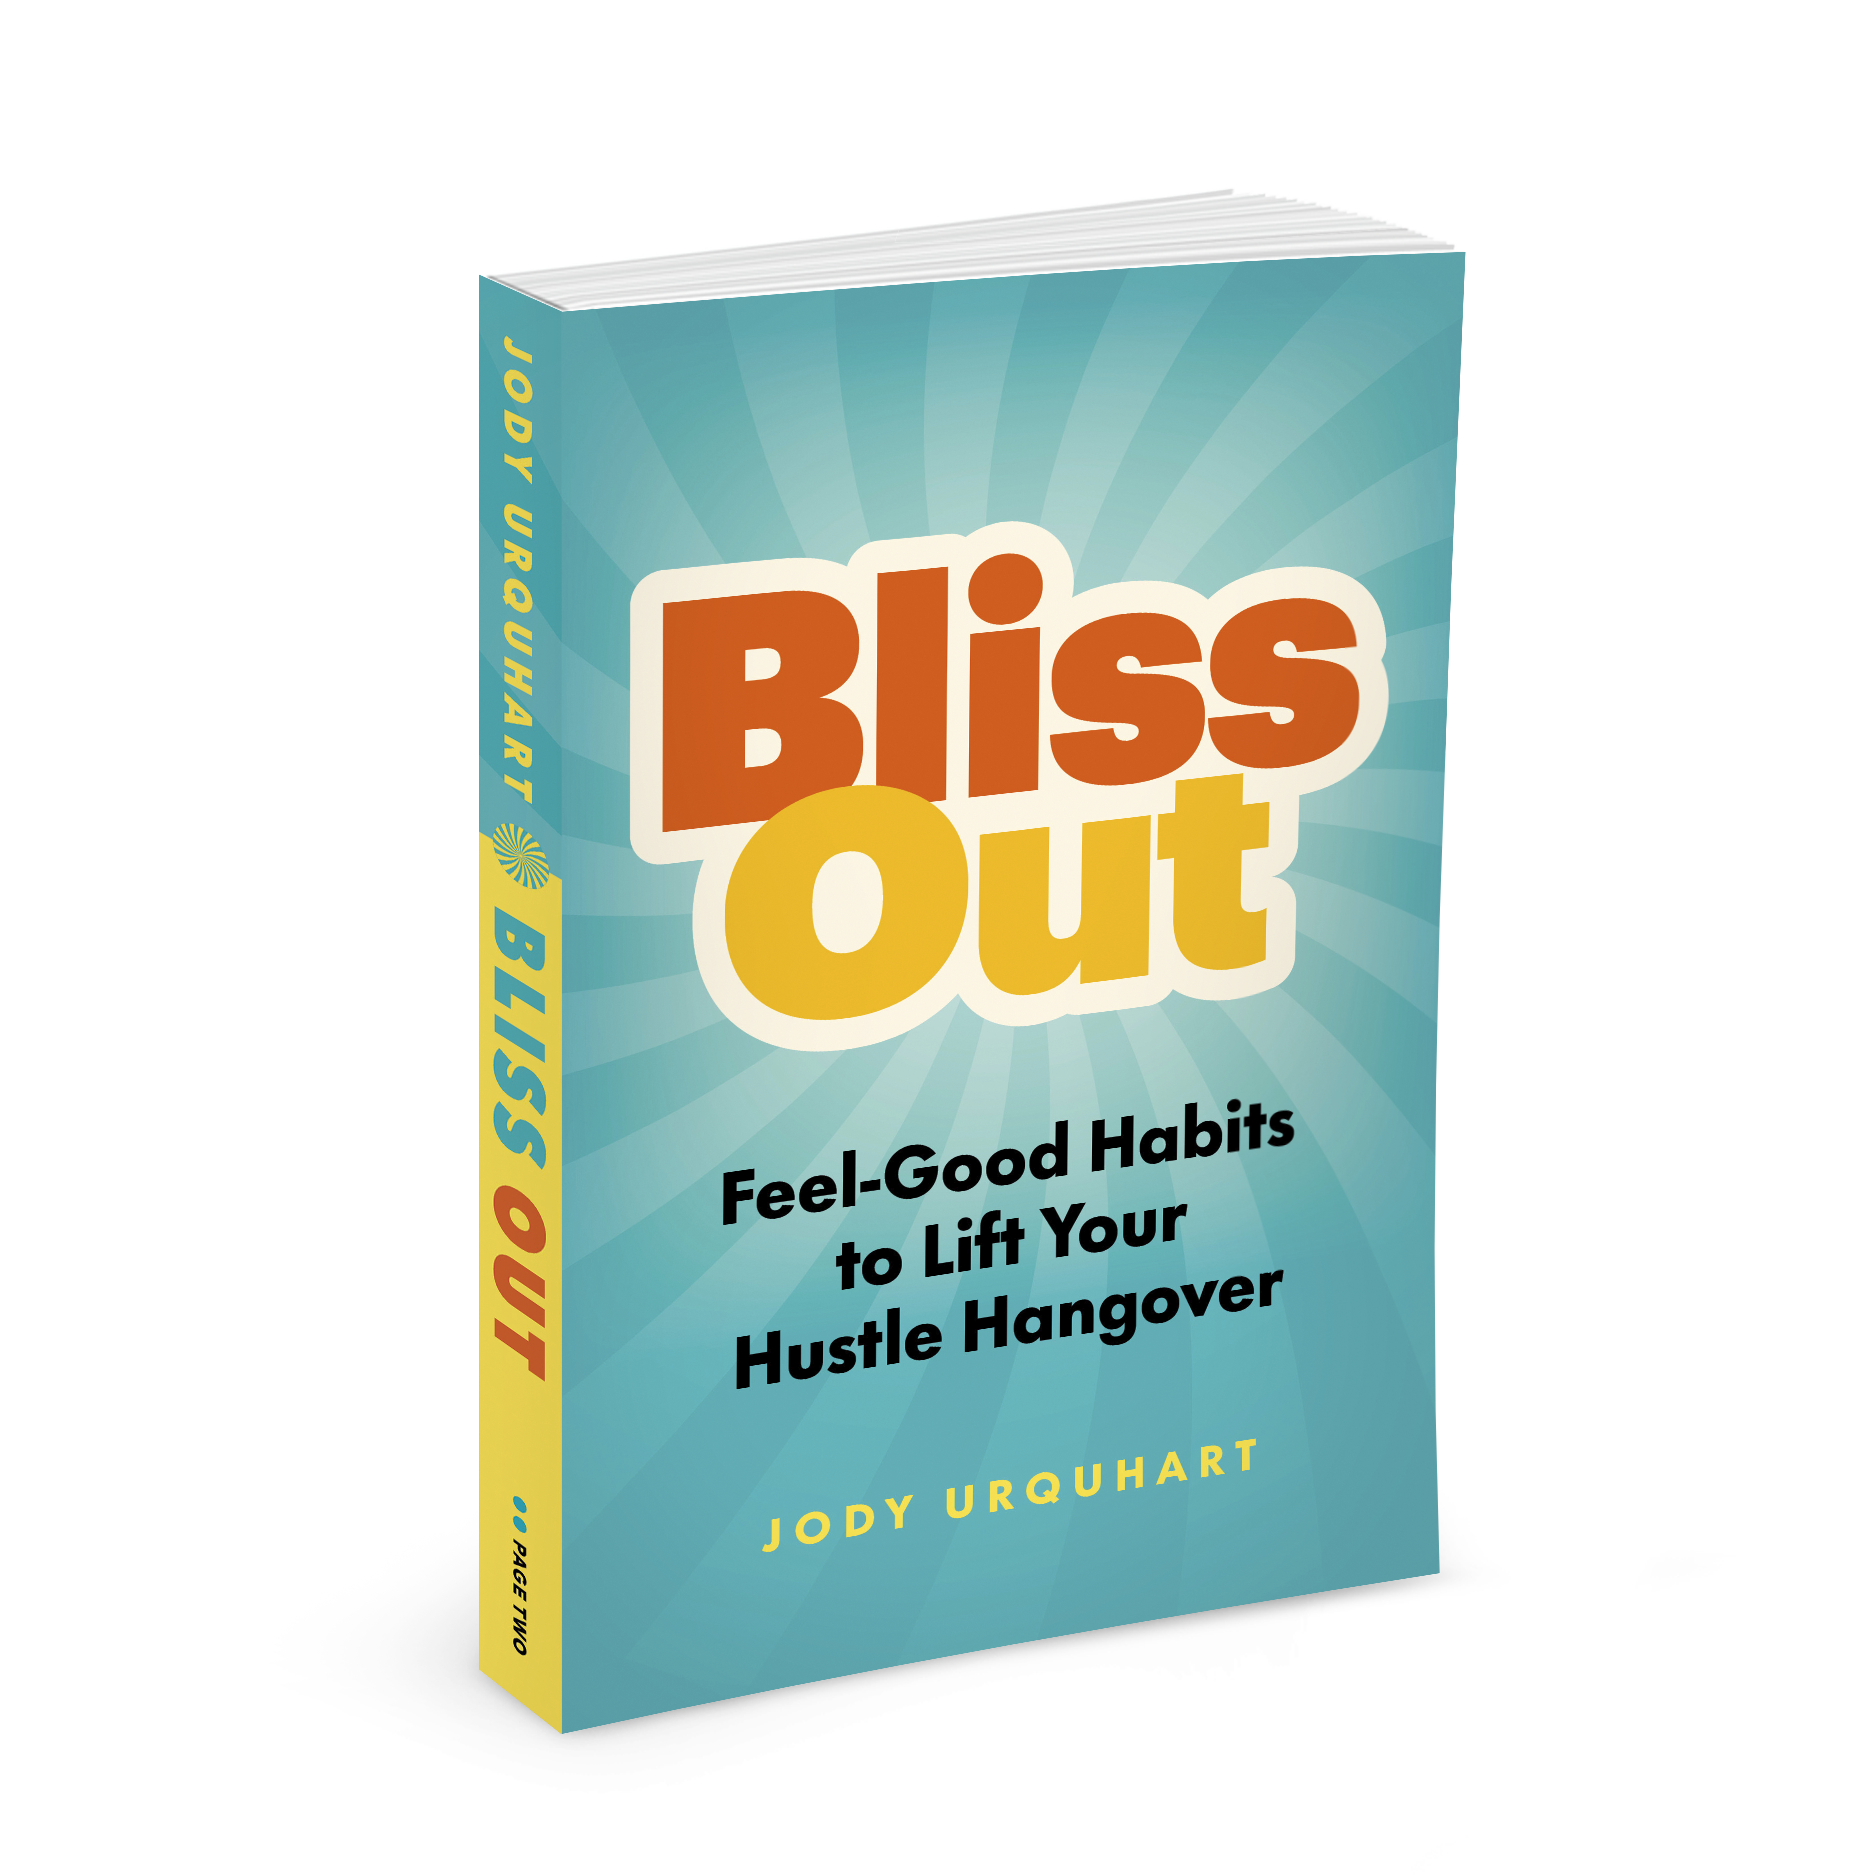 Jody Urquhart Releases New Book To Help People Effectively Deal With Hustle Hangover 